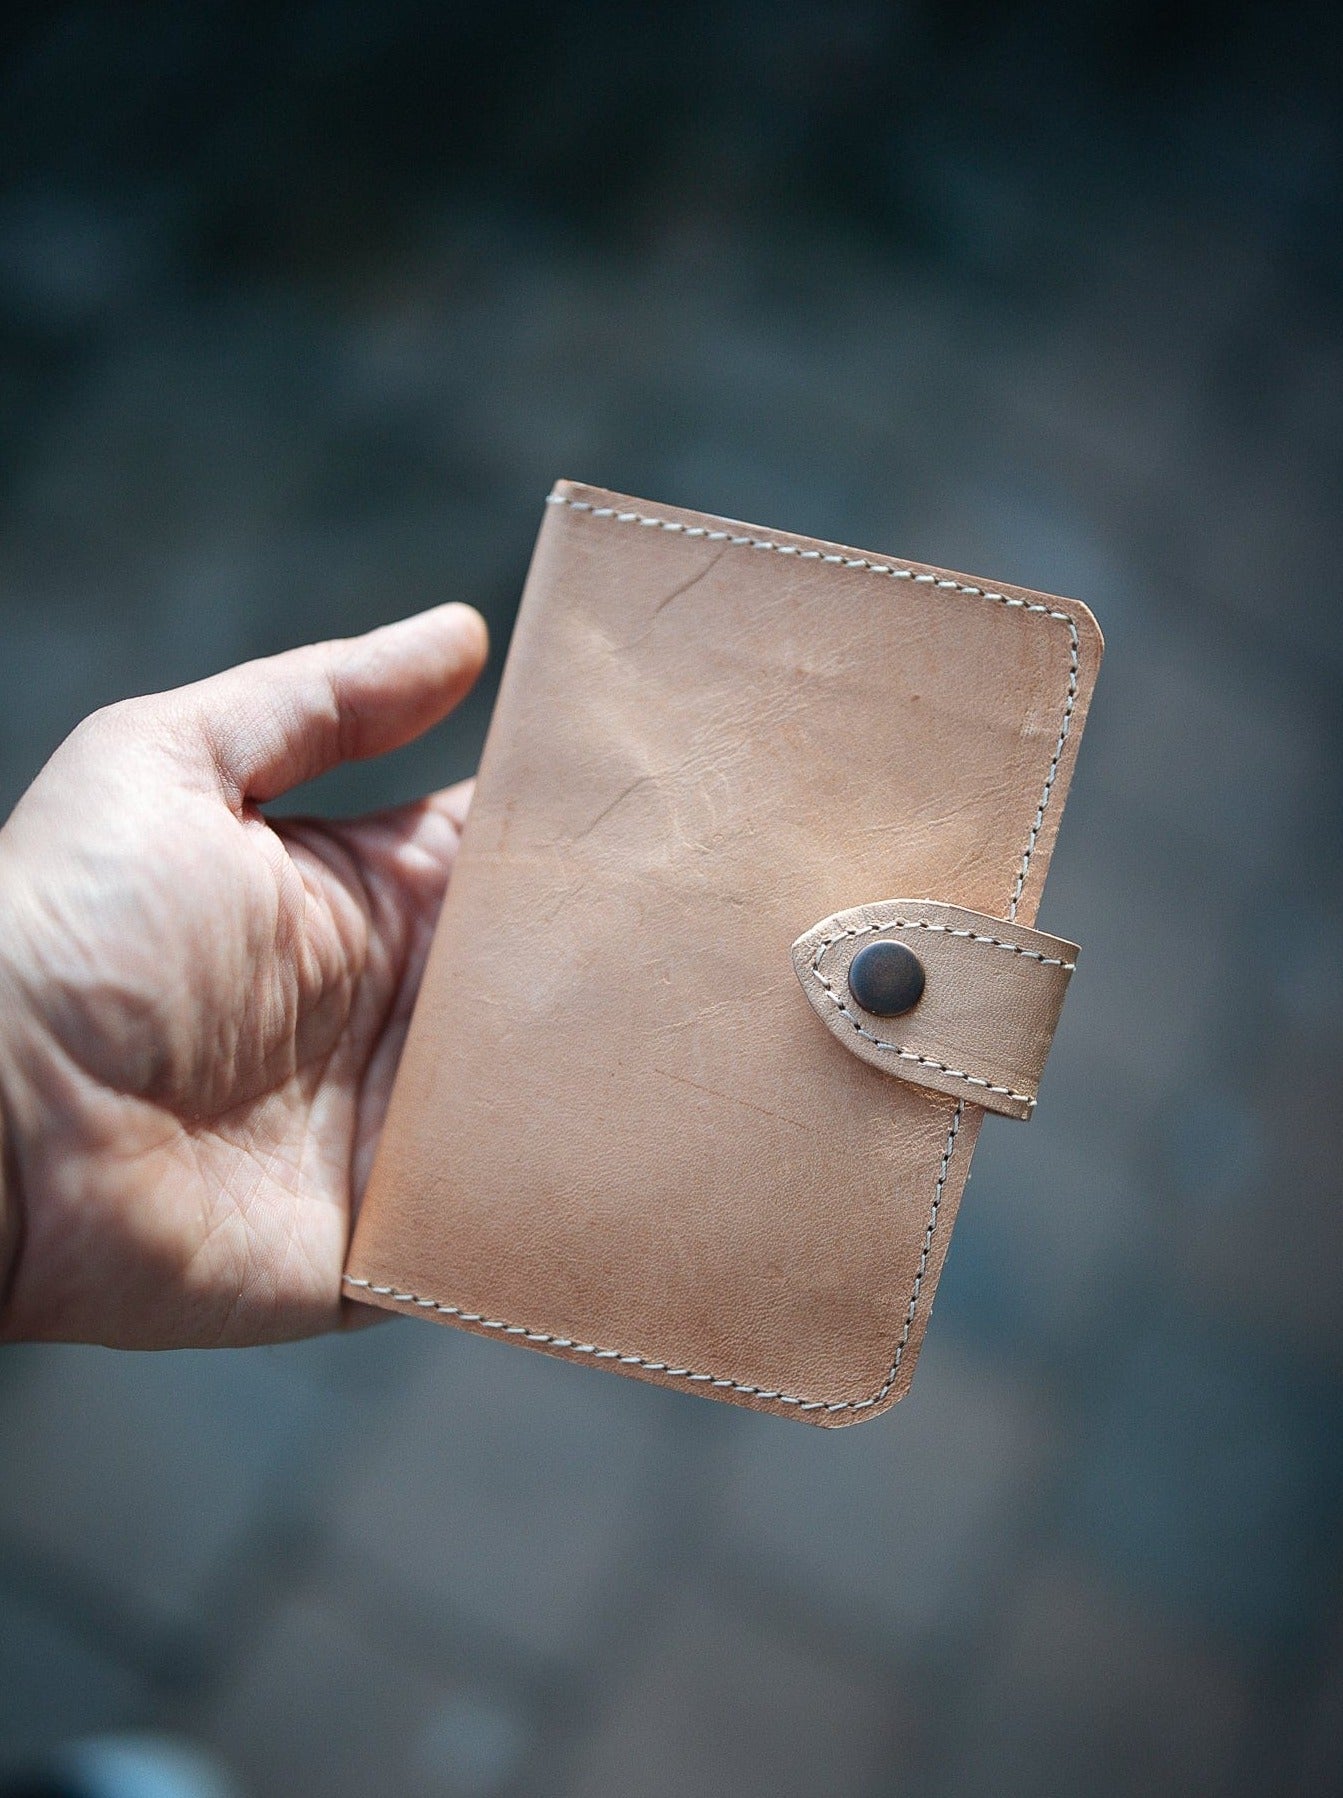 The Real McCaul Leathergoods Wallets Passport Cover Wallet Australian Made Australian Owned Passport Holder Kangaroo Leather- Made in Australia